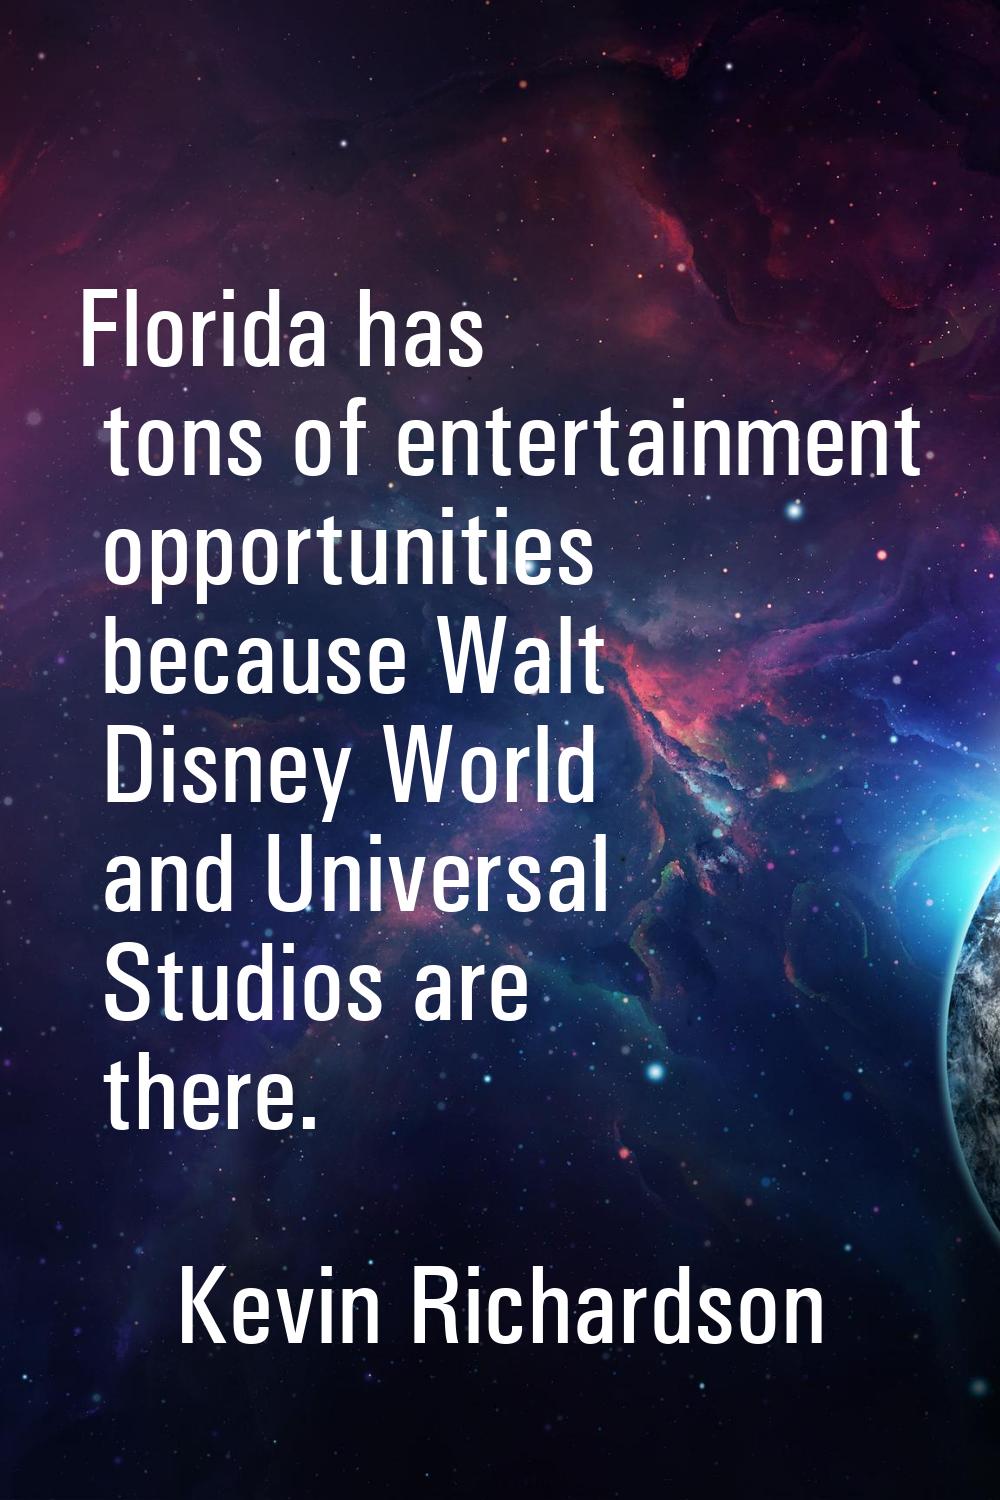 Florida has tons of entertainment opportunities because Walt Disney World and Universal Studios are